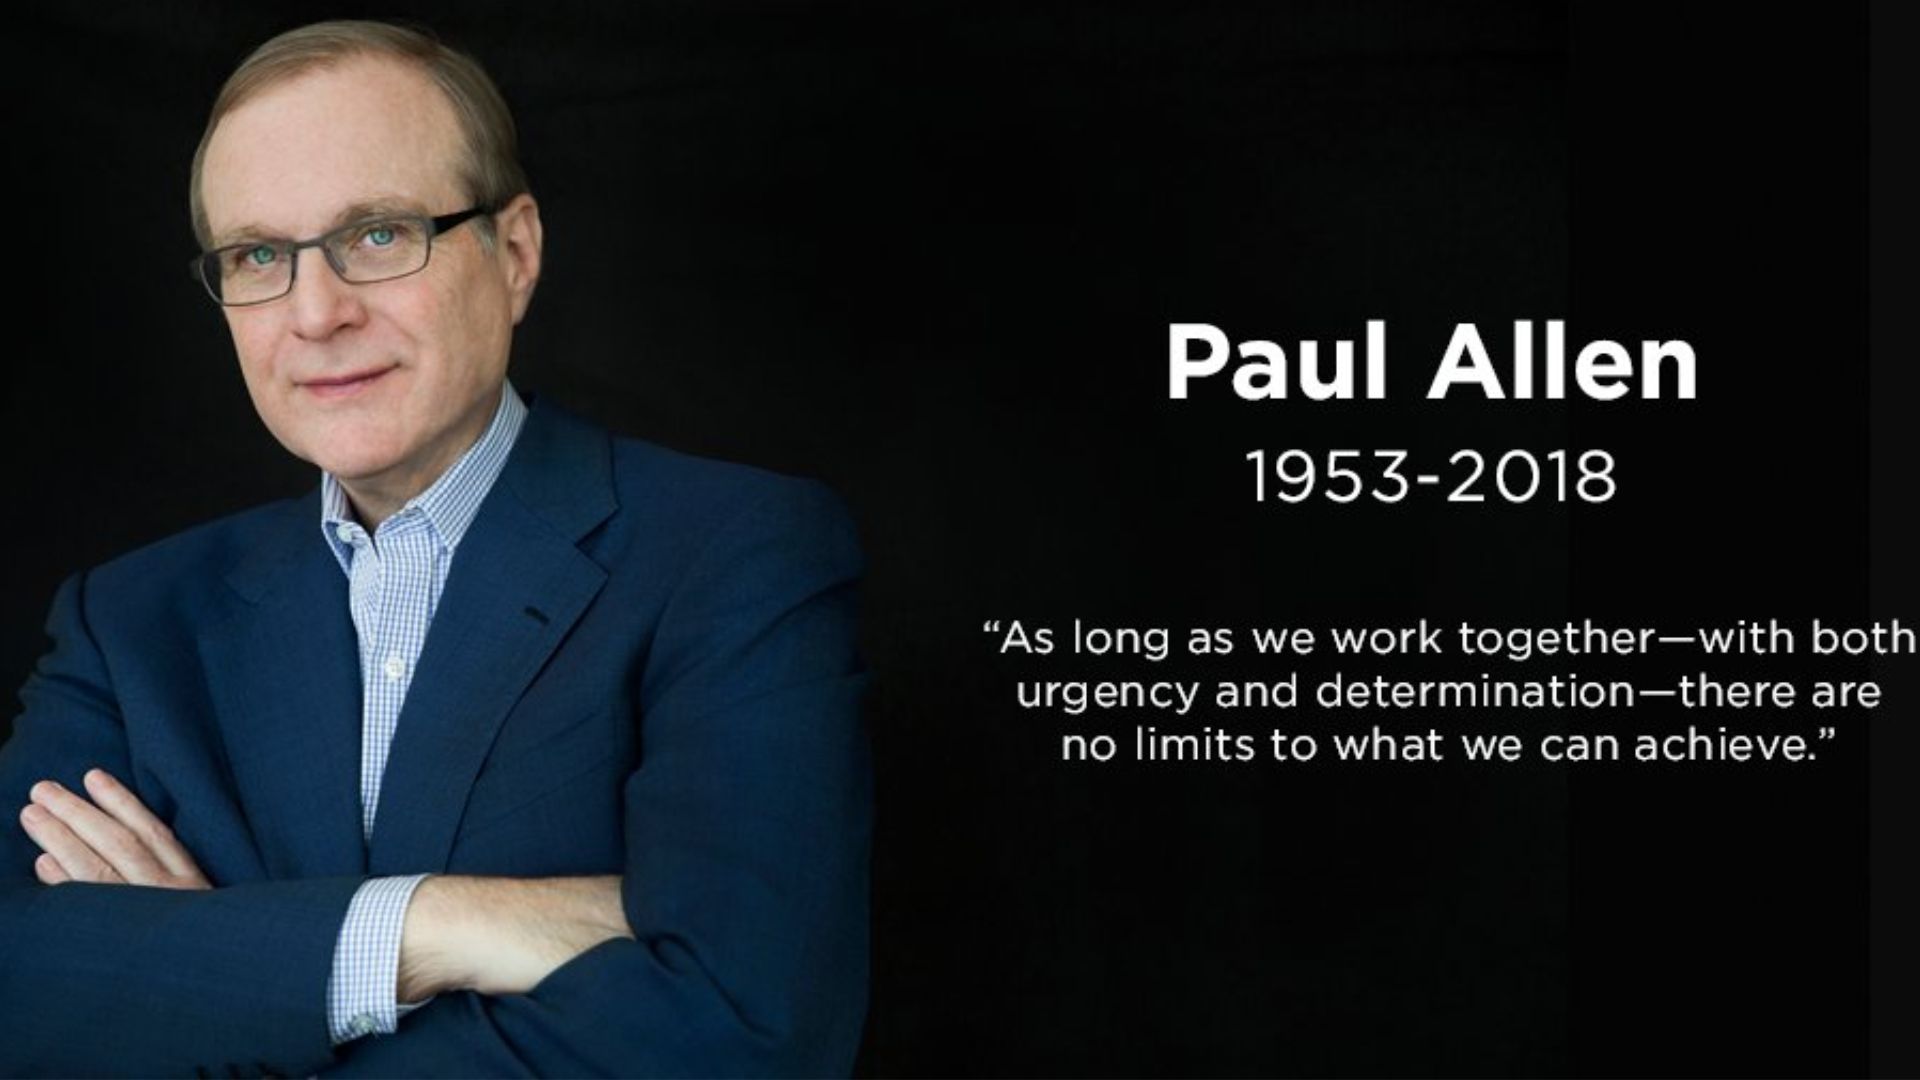 Paul Allen Posing With Arms Crossed